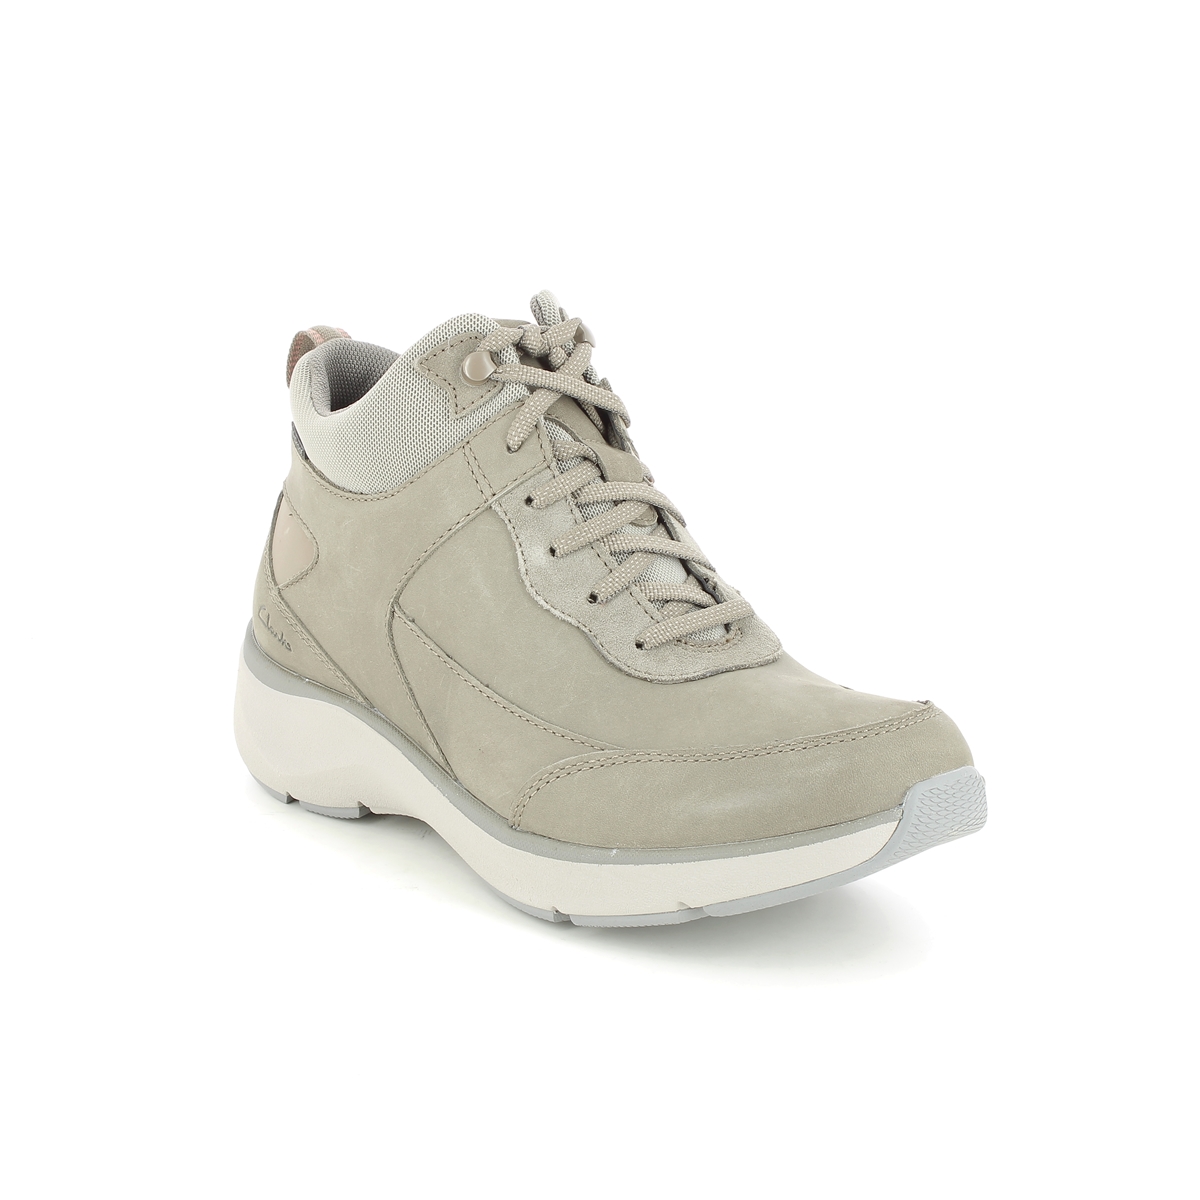 Clarks Wave 2 Mid Tex Taupe Nubuck Womens Walking Boots 536585E In Size 6 In Plain Taupe Nubuck E Width Fitting Narrow Fit